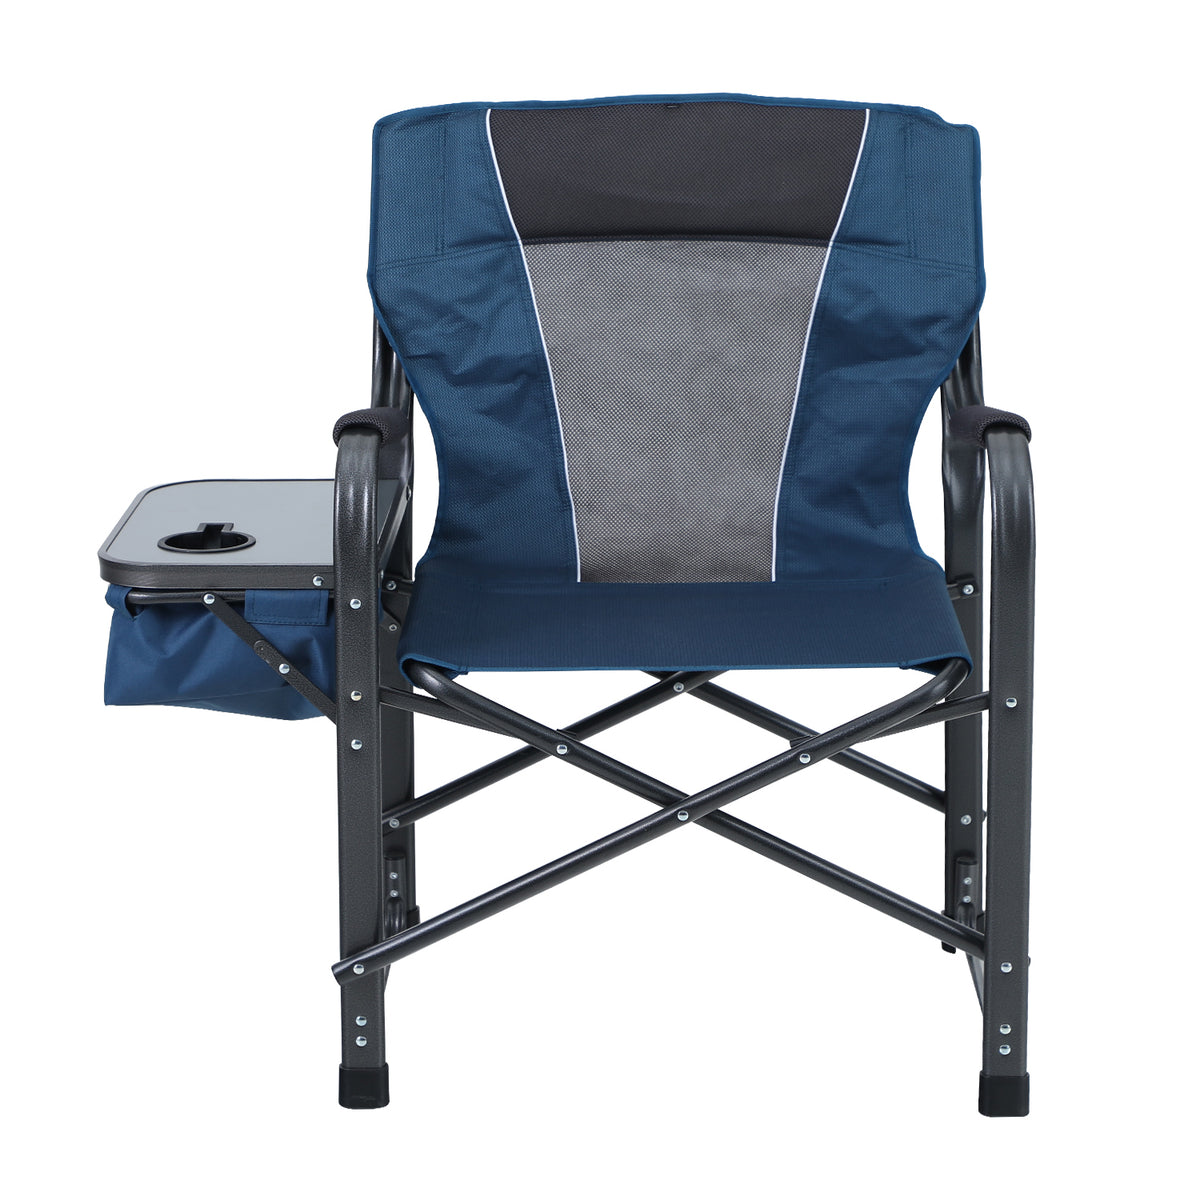 Alpha Camp Metal Foldable Director’s Chair Camping Chair with Cup Holder Storage Box